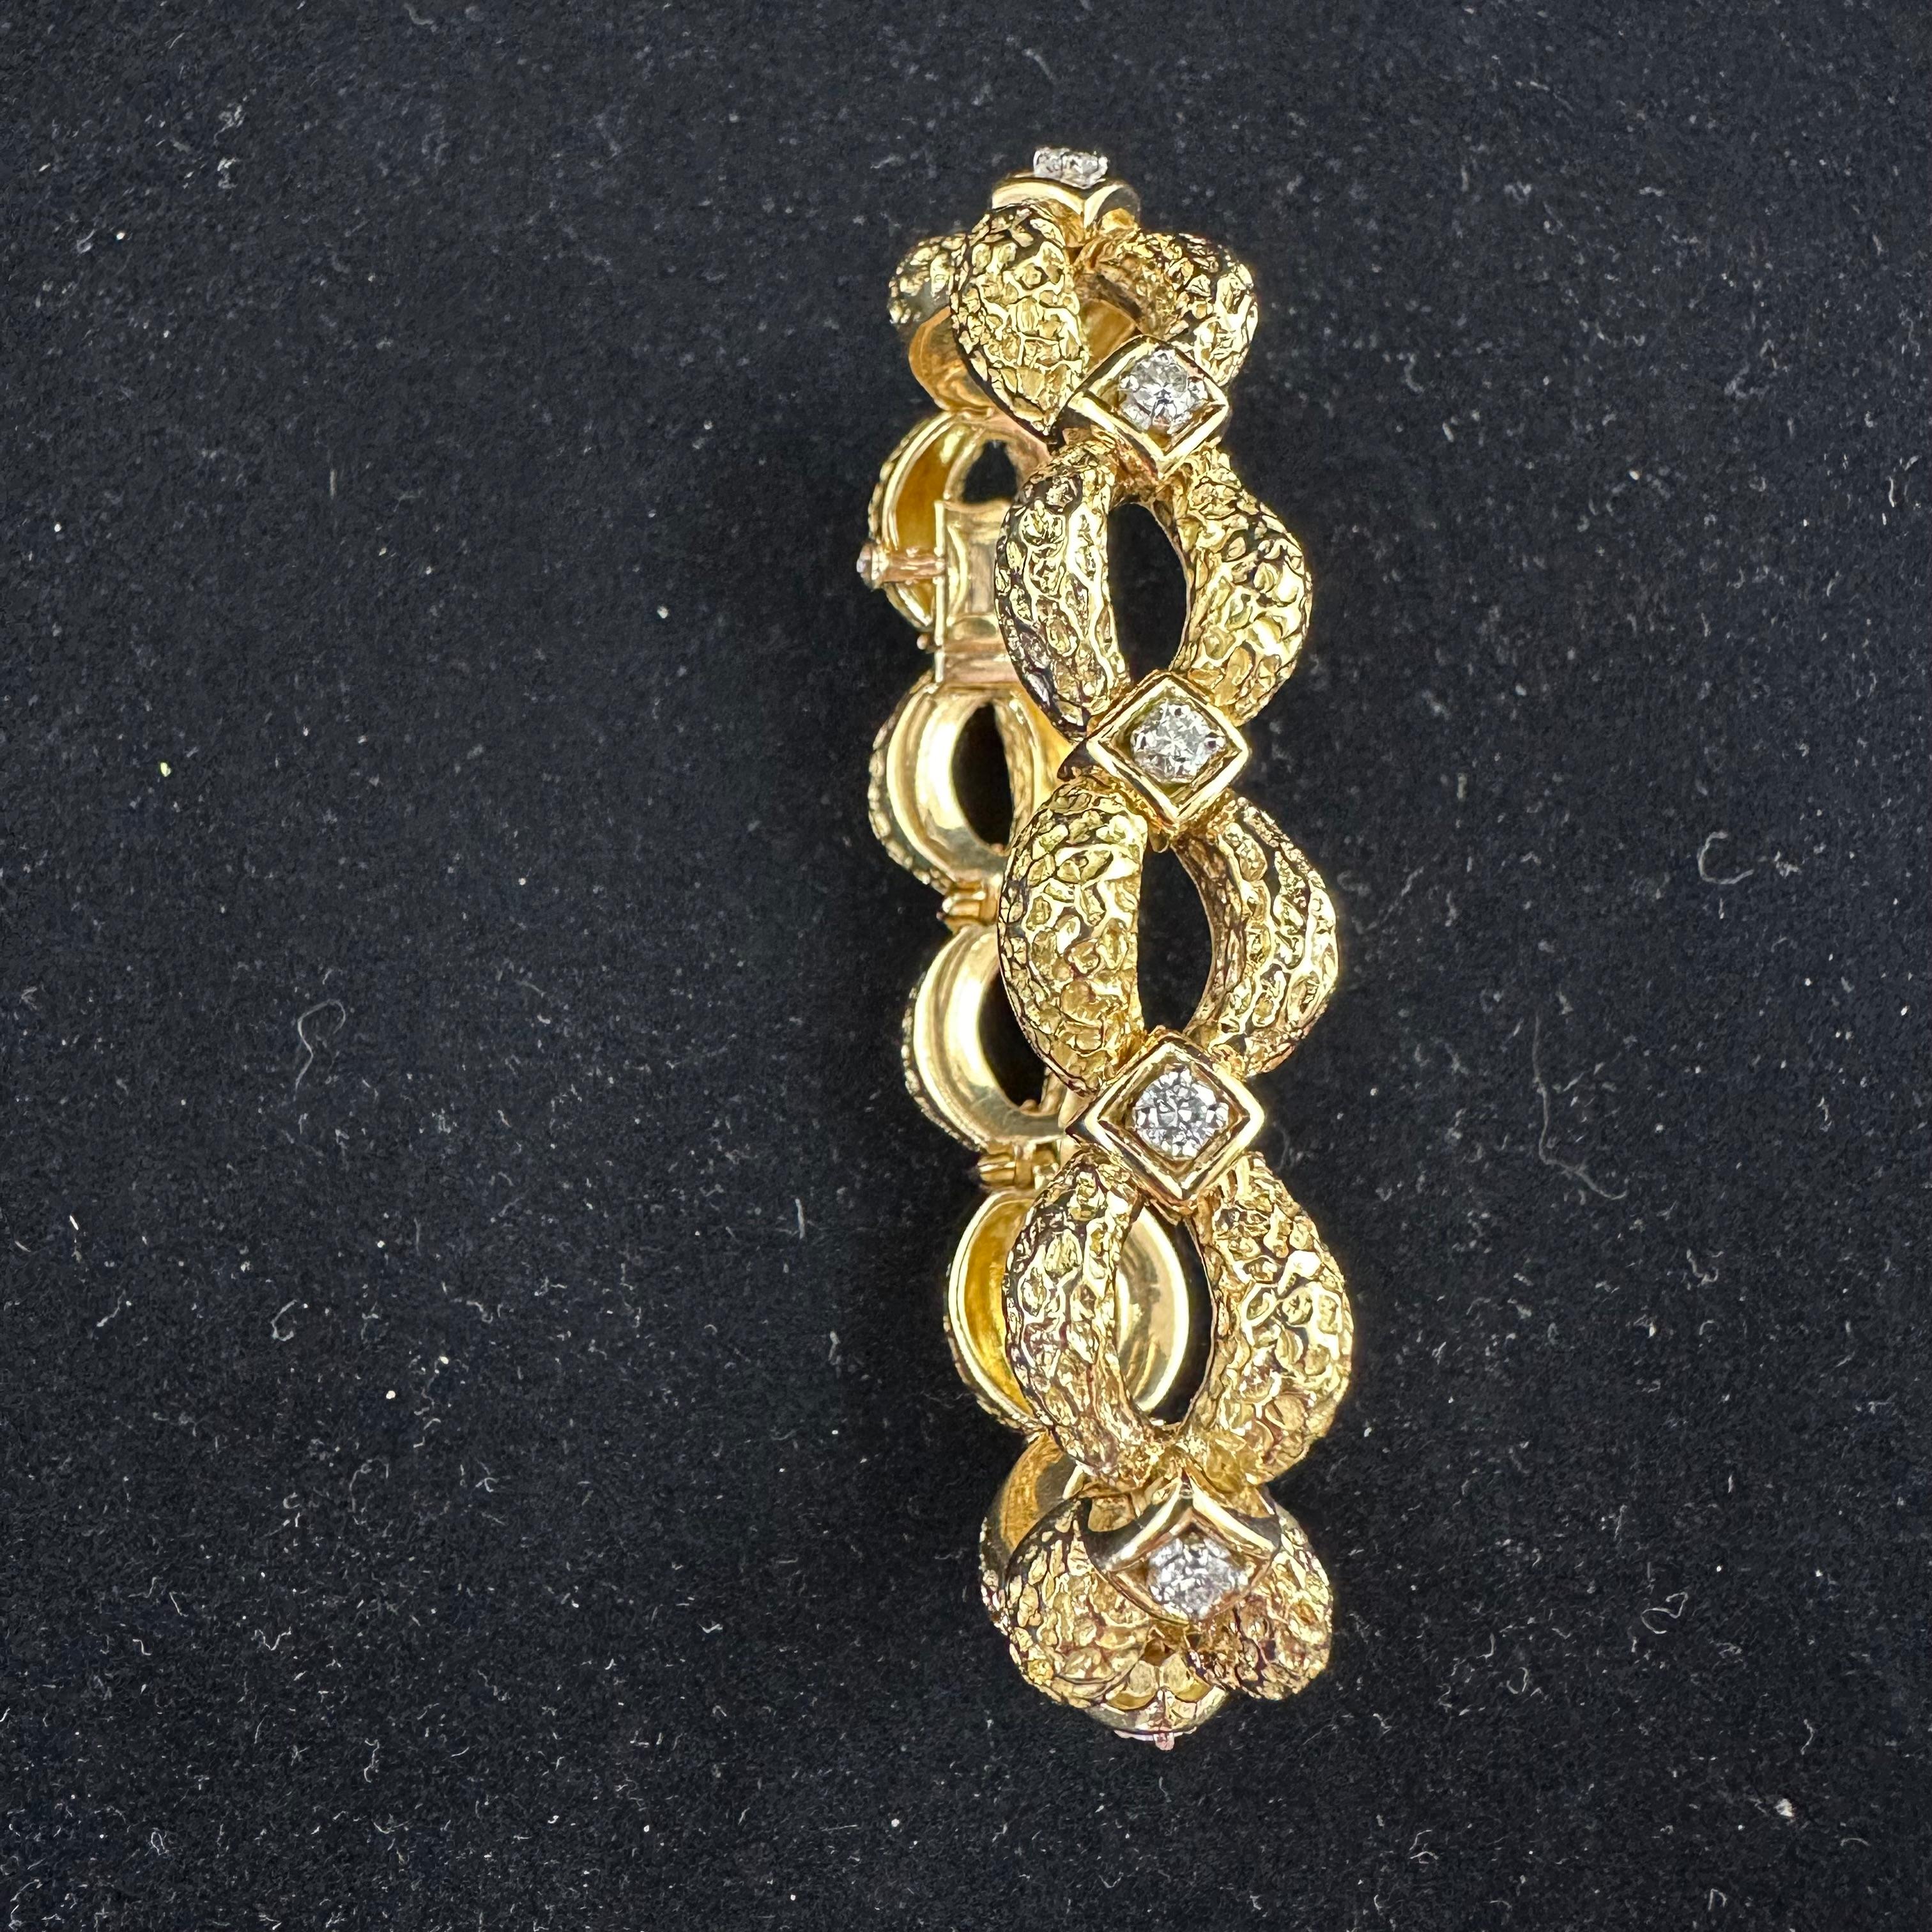 1960's Yellow Gold Round Diamond Bracelet 
Hallmarked #2846
65 grams or 2.30 Oz 
Medium size 6.5 inches 
11 Round Diamonds G-H Color @ 1.65 cts tW
Diamond Button Clasp, Press and open with Pin pusher safety Clasp. Beautiful Sections of Textured